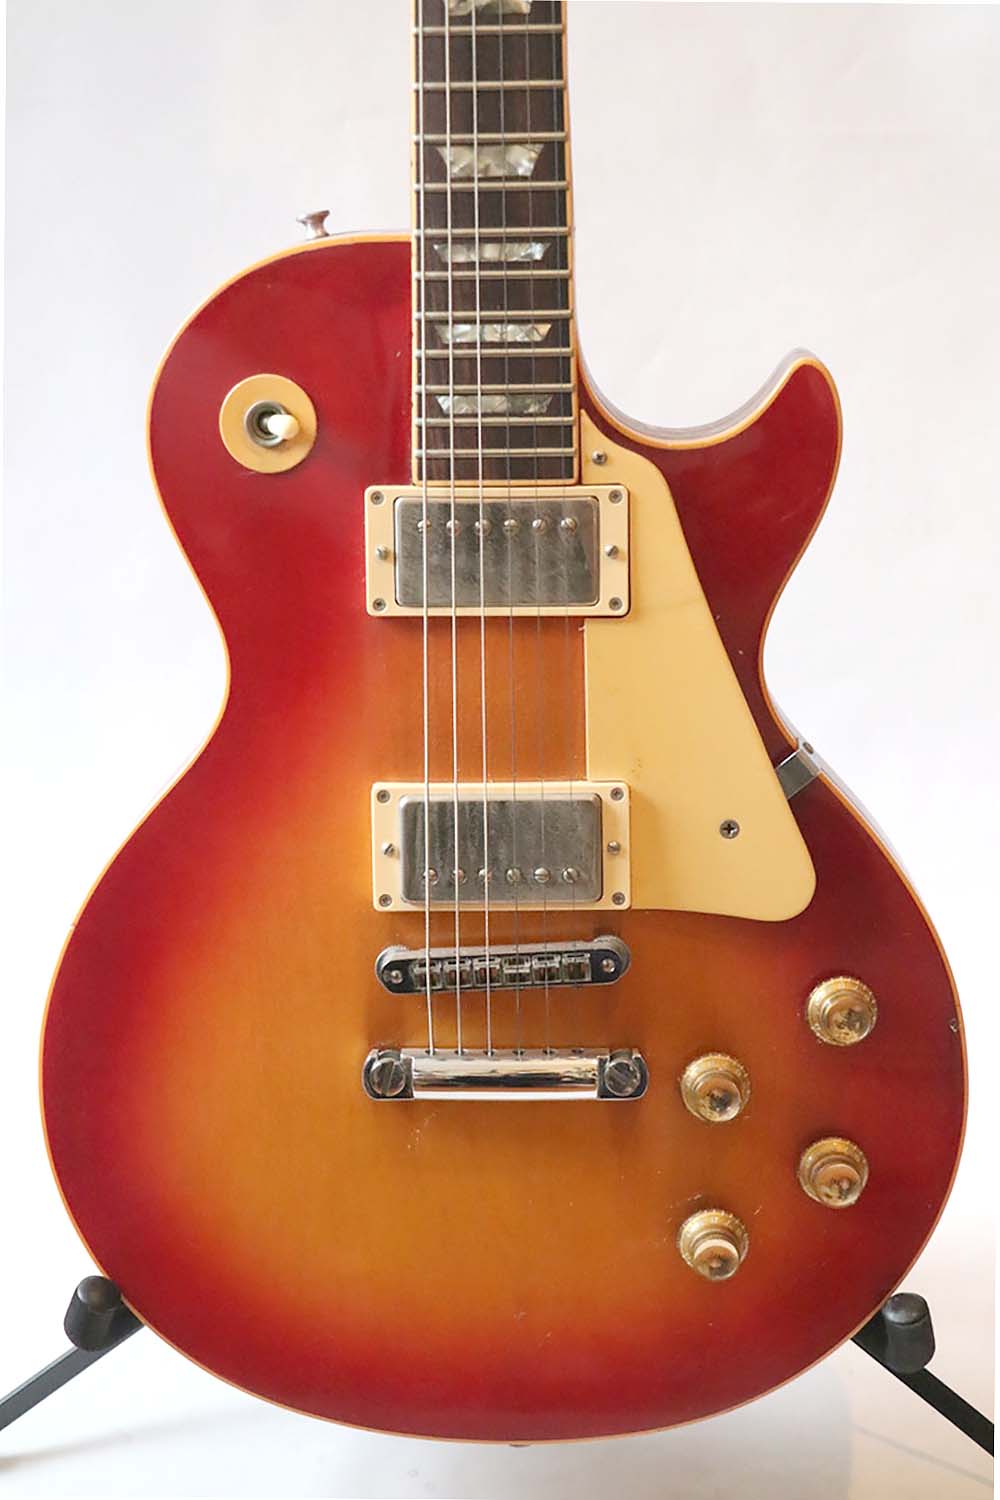 Gibson Les Paul Standard Deluxe 1976 – The Guitar Colonel